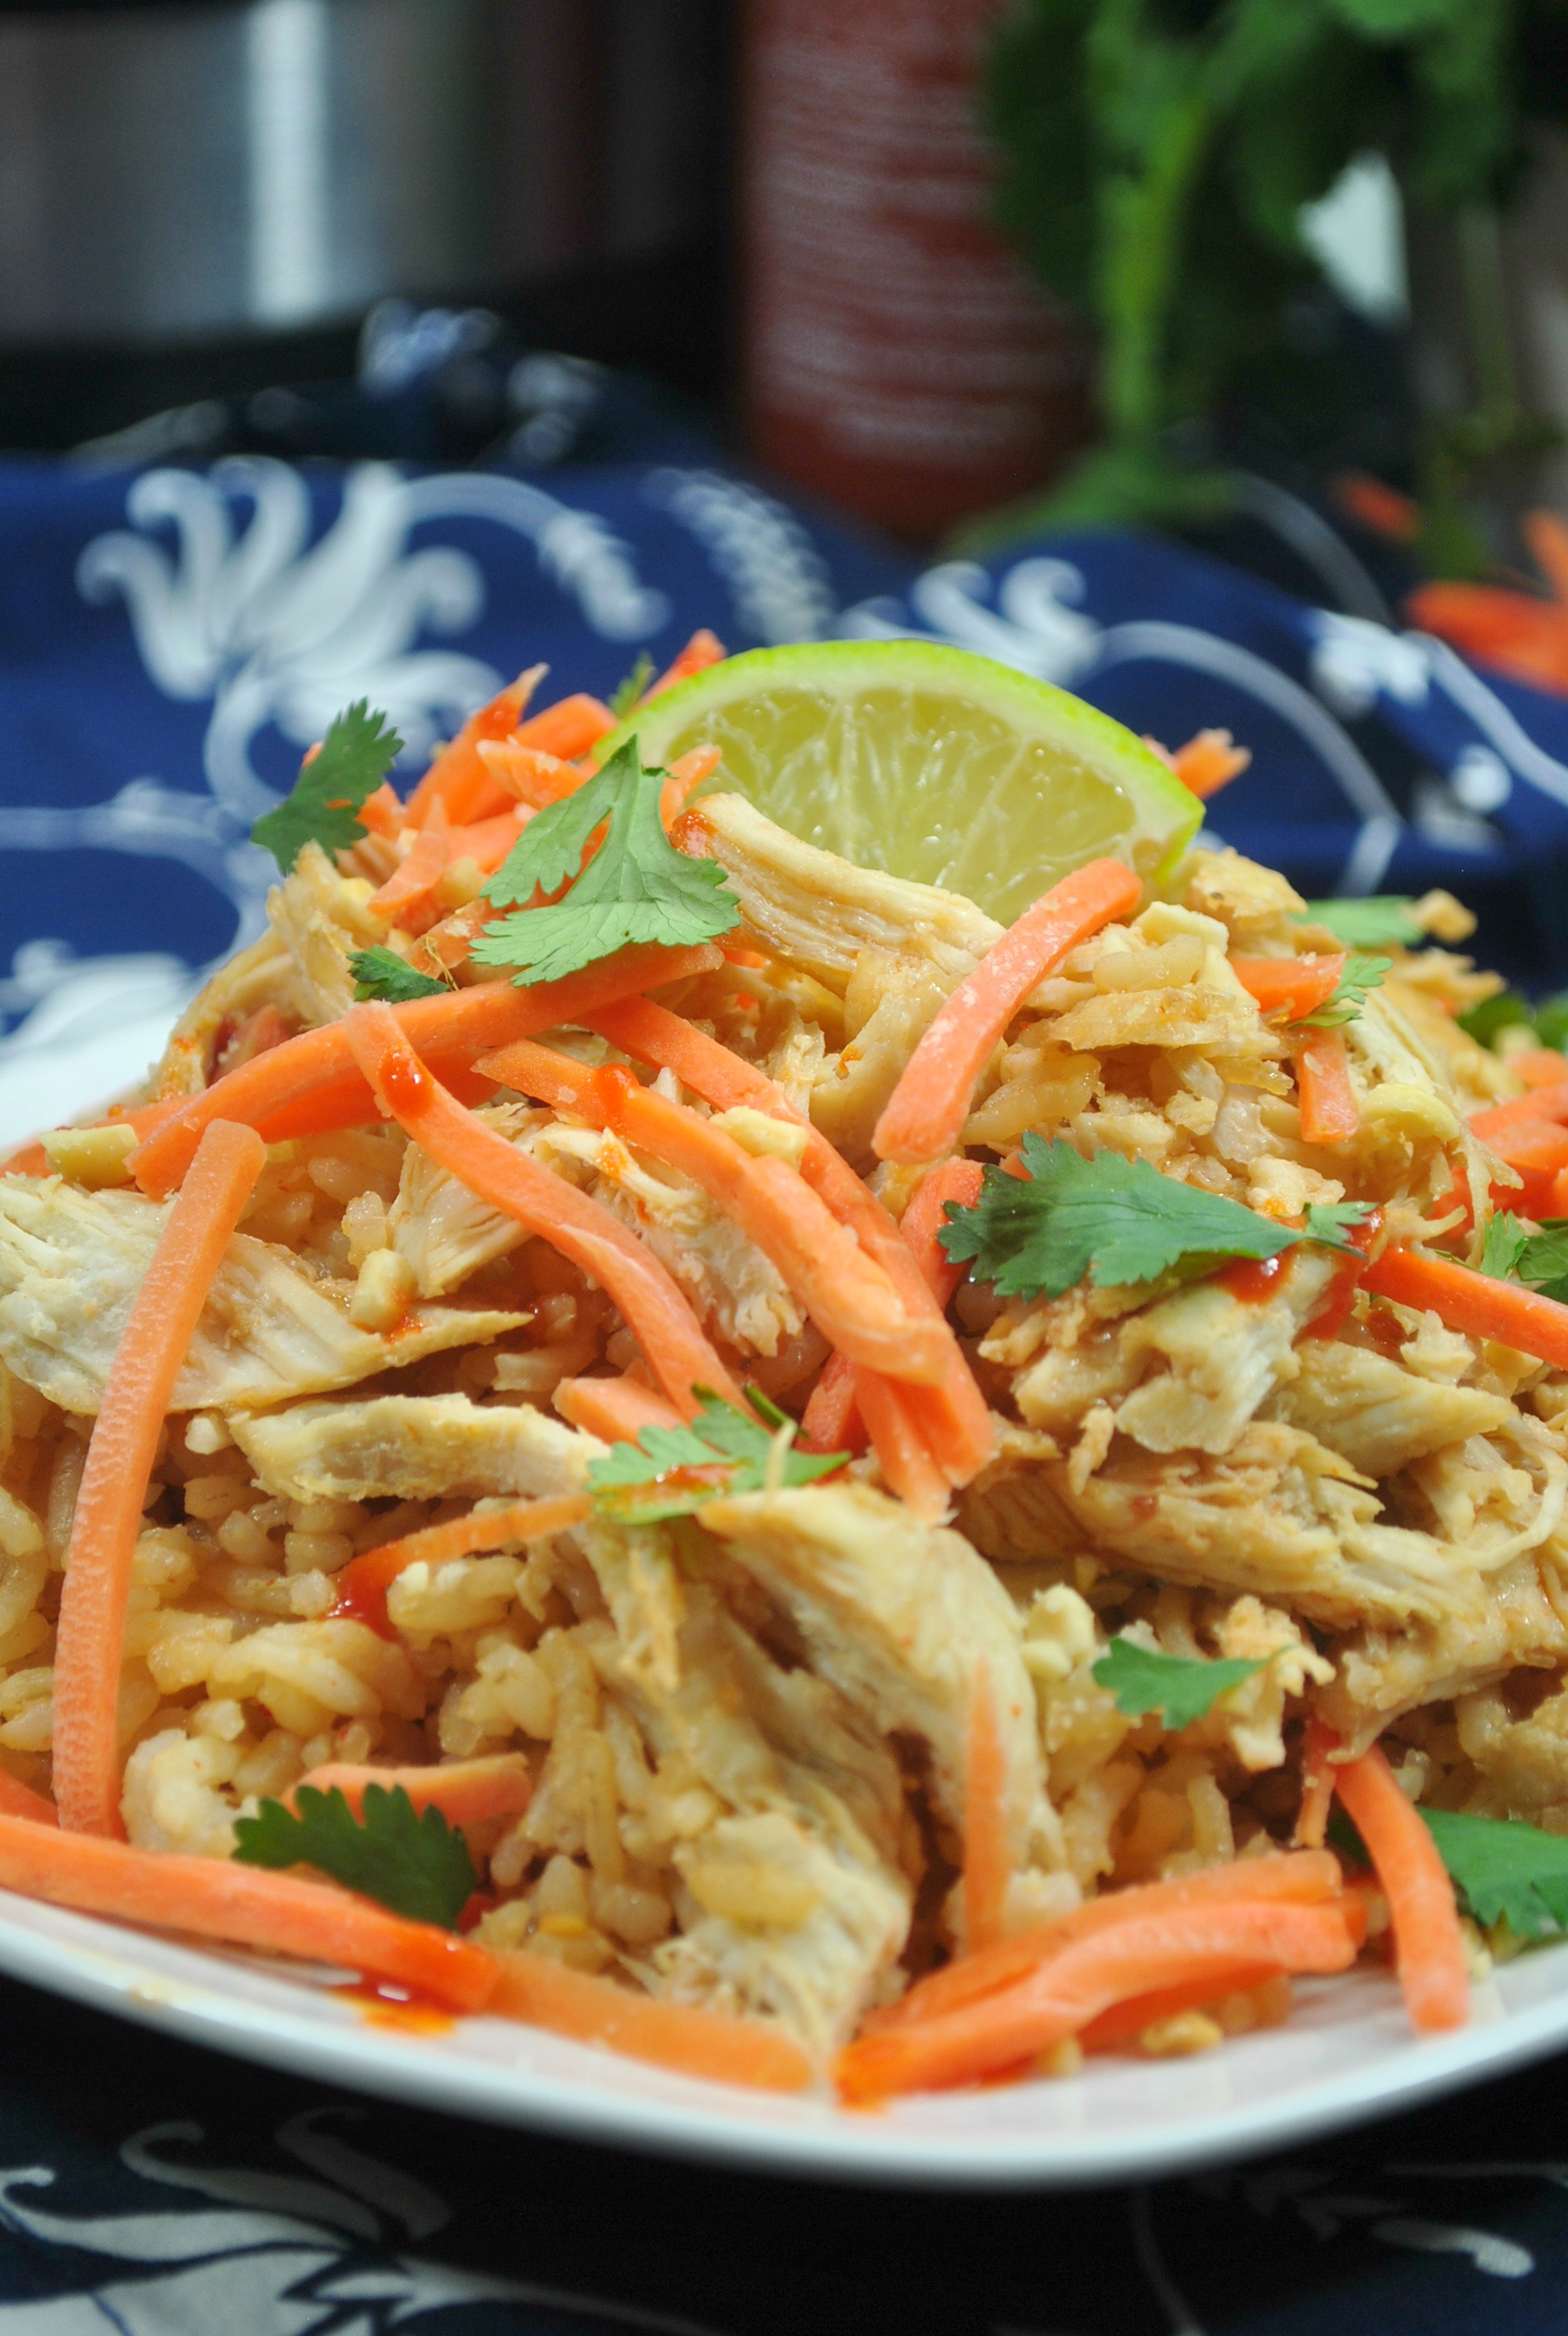 Looking for a delicious chicken pad thai recipe? This pad thai chicken recipe is made in the Instant Pot. An amazing Asian dinner can be on the table in 30 minutes